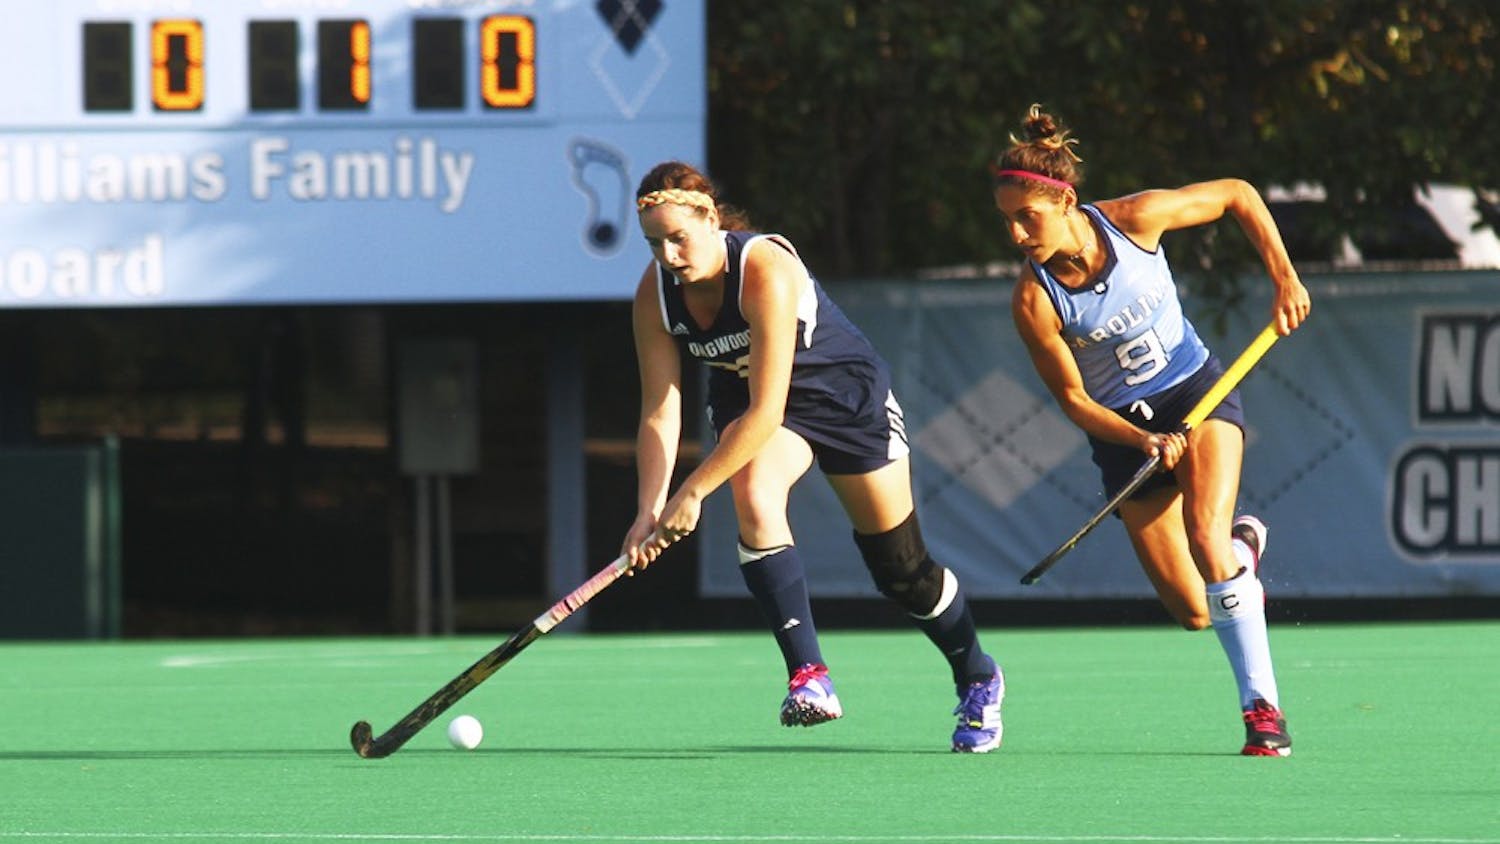 The UNC field hockey team beats Longwood on Friday afternoon, Oct. 9, with a score of 8-1. Emily Wold (9) defends an opponent.